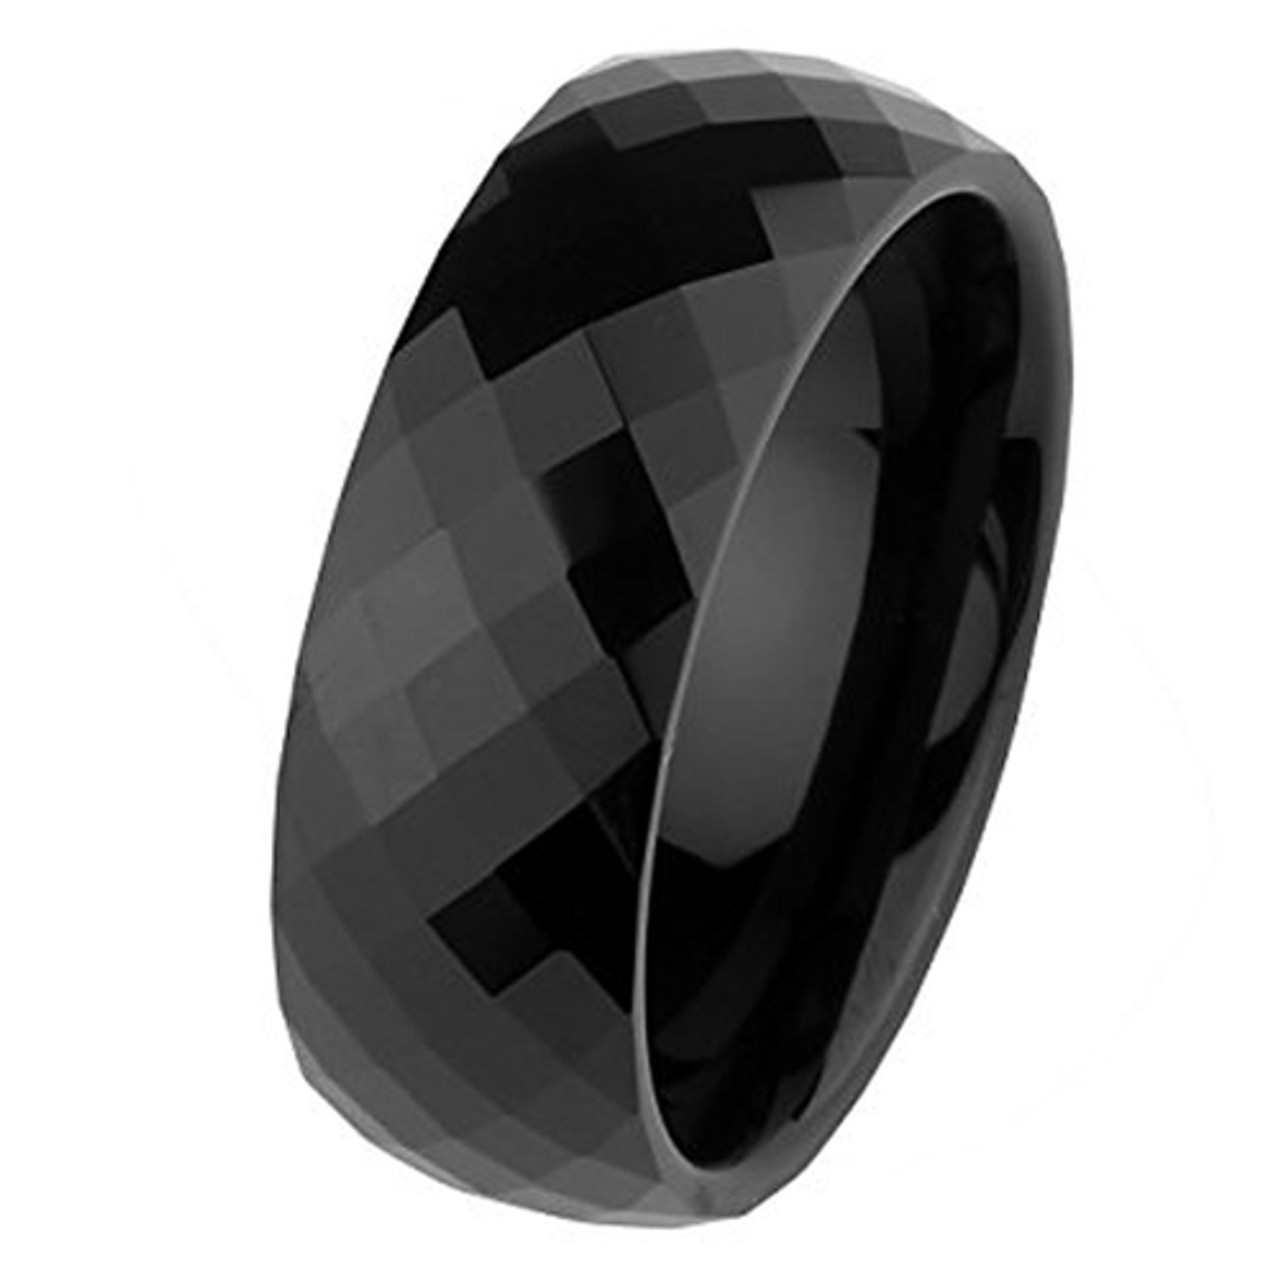 (8mm) Unisex or Men's Tungsten carbide Wedding Ring Bands. Black Diamond Faceted High Polished Domed Top Ring.